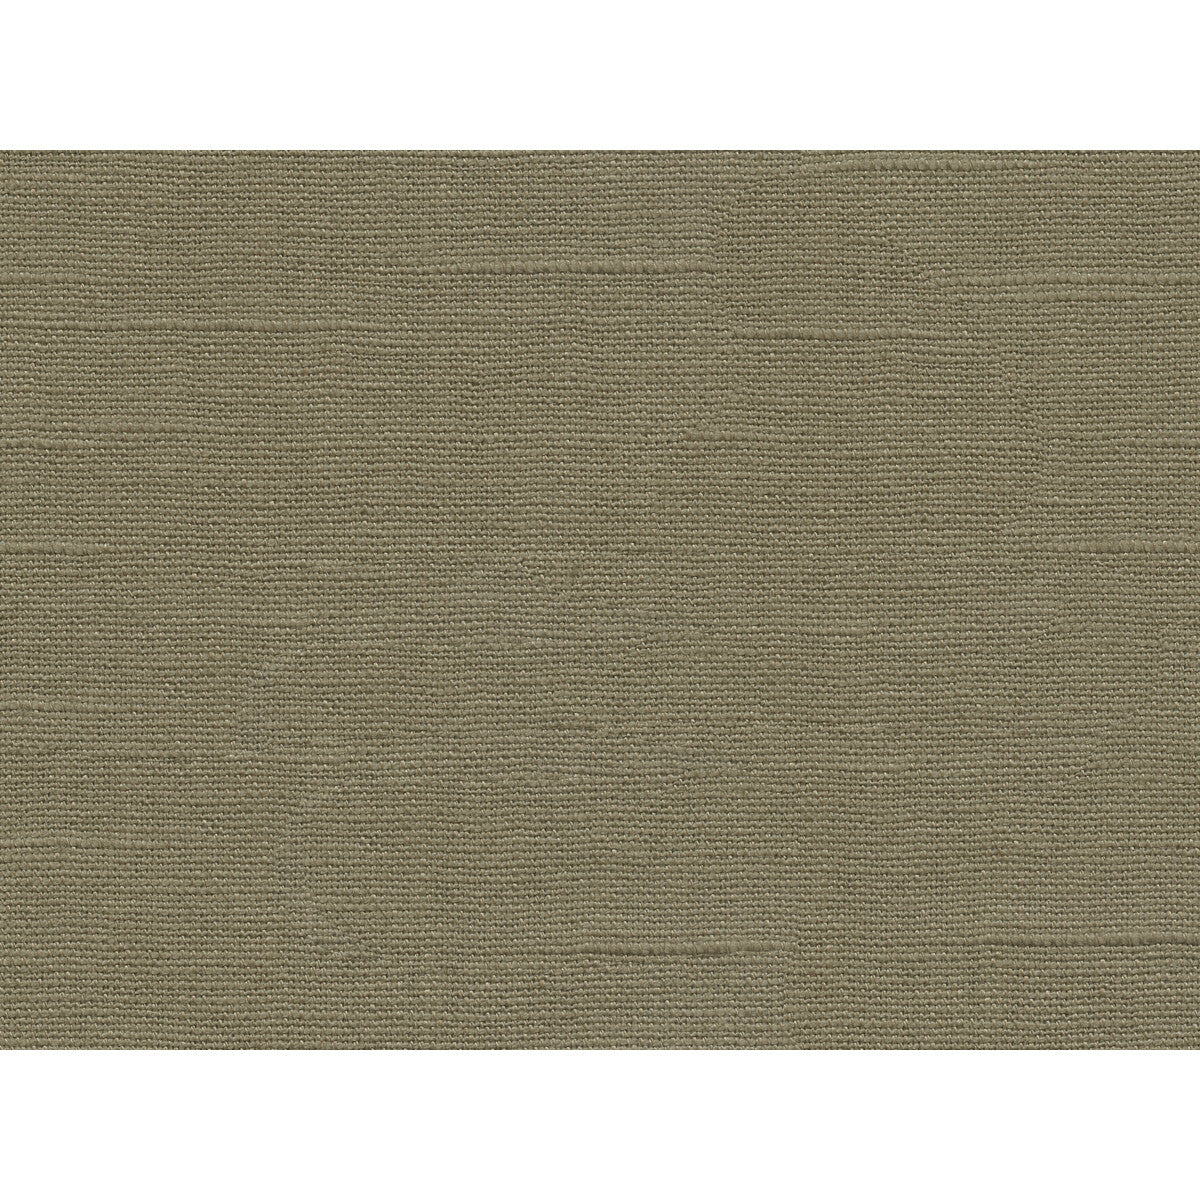 Hixson Linen fabric in bark color - pattern 2018115.6.0 - by Lee Jofa in the Performance Kravetarmor collection